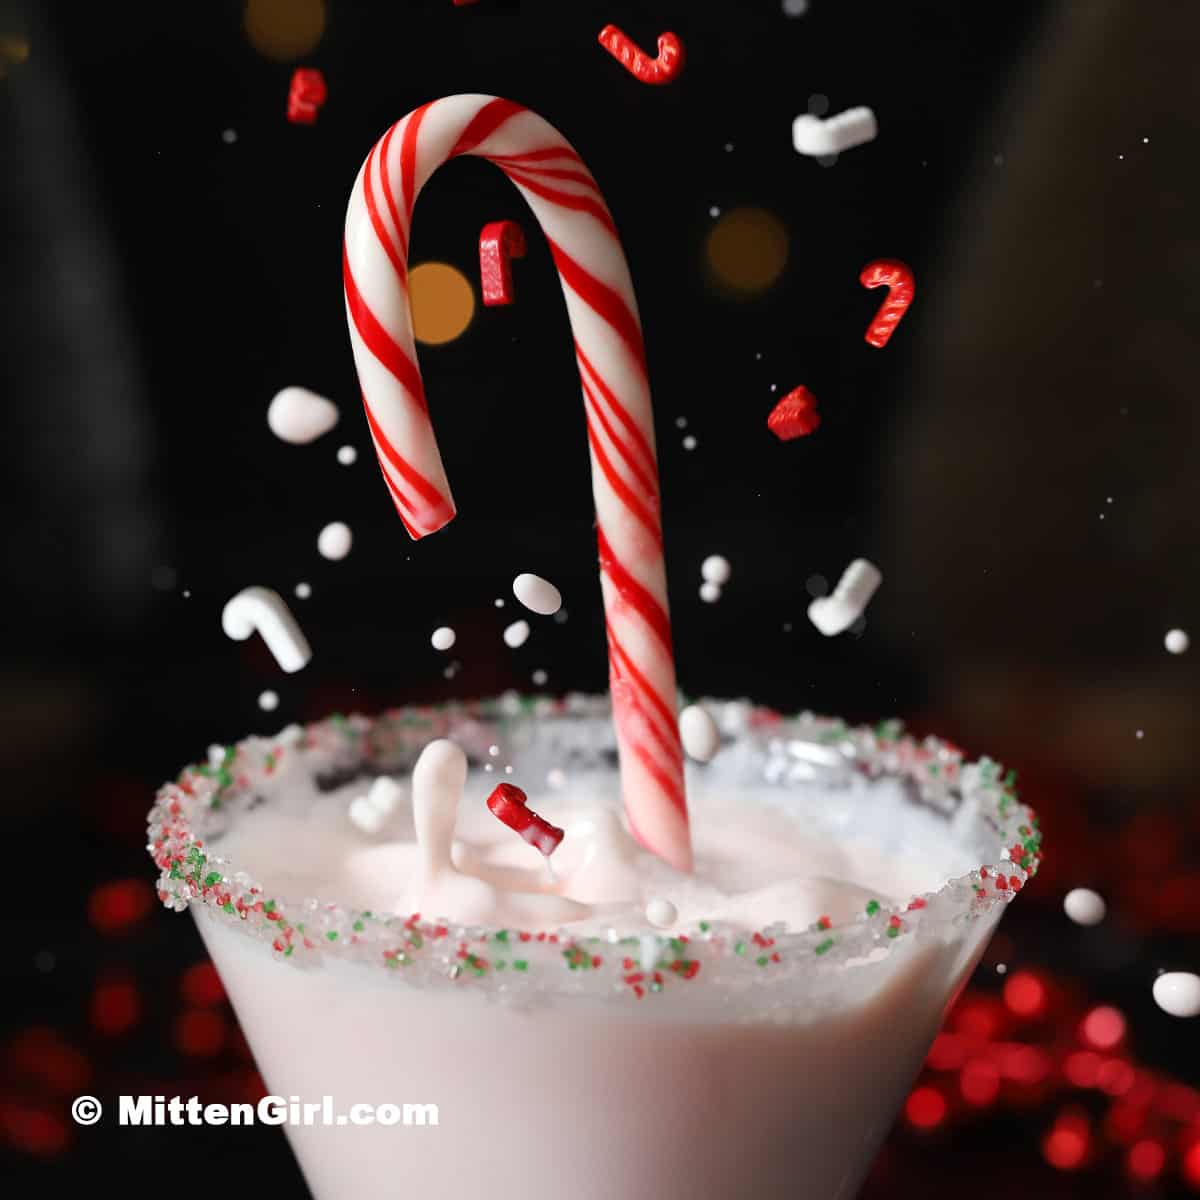 A candy cane splashing into a cocktail.